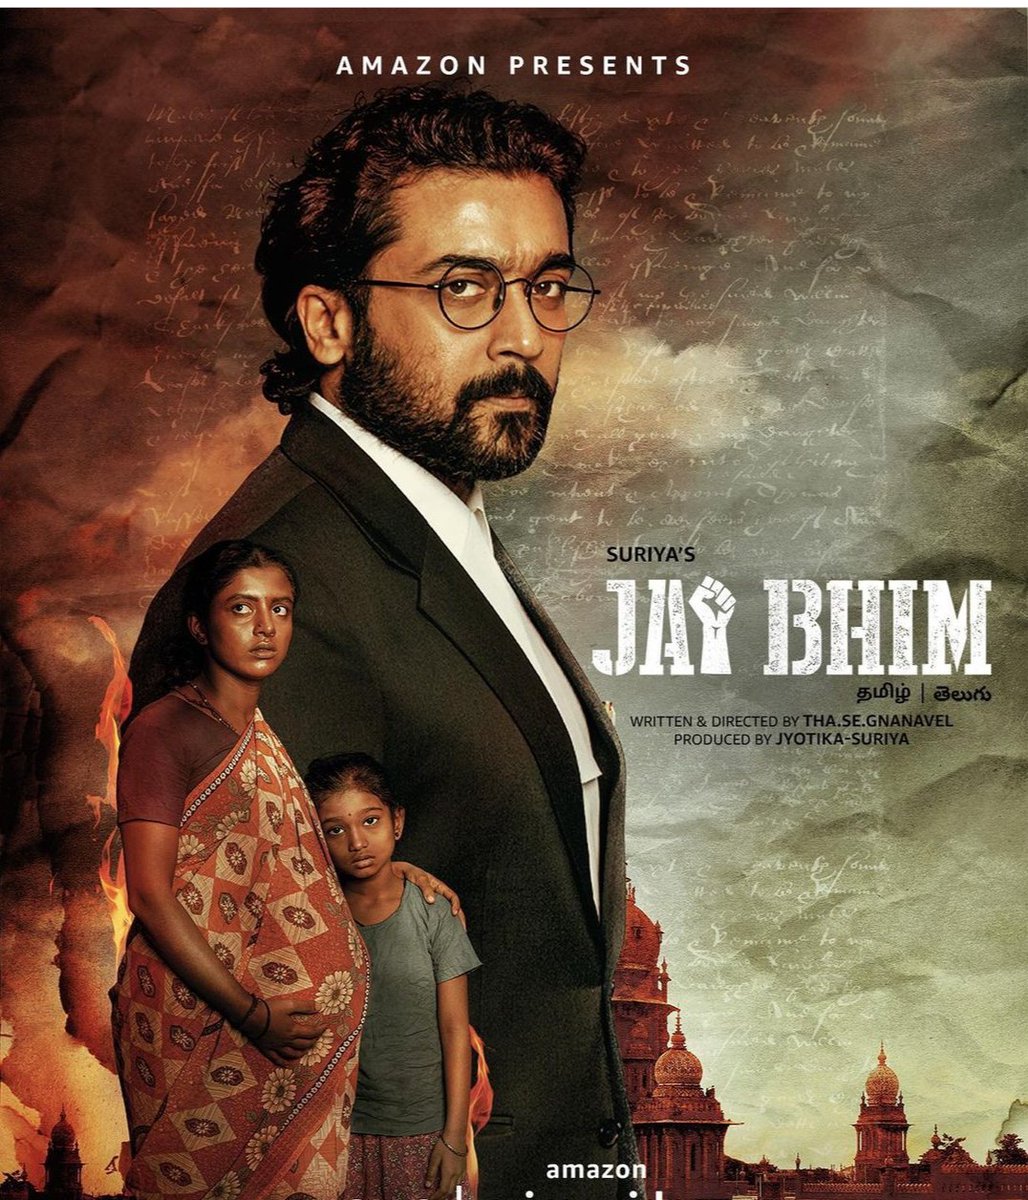 #jaibhimonprime
@PrimeVideo 
proud to bring this story of courage and faith in pursuit of justice 
#SRKkahir #JaiBhim #JaiHind @actorsuriya